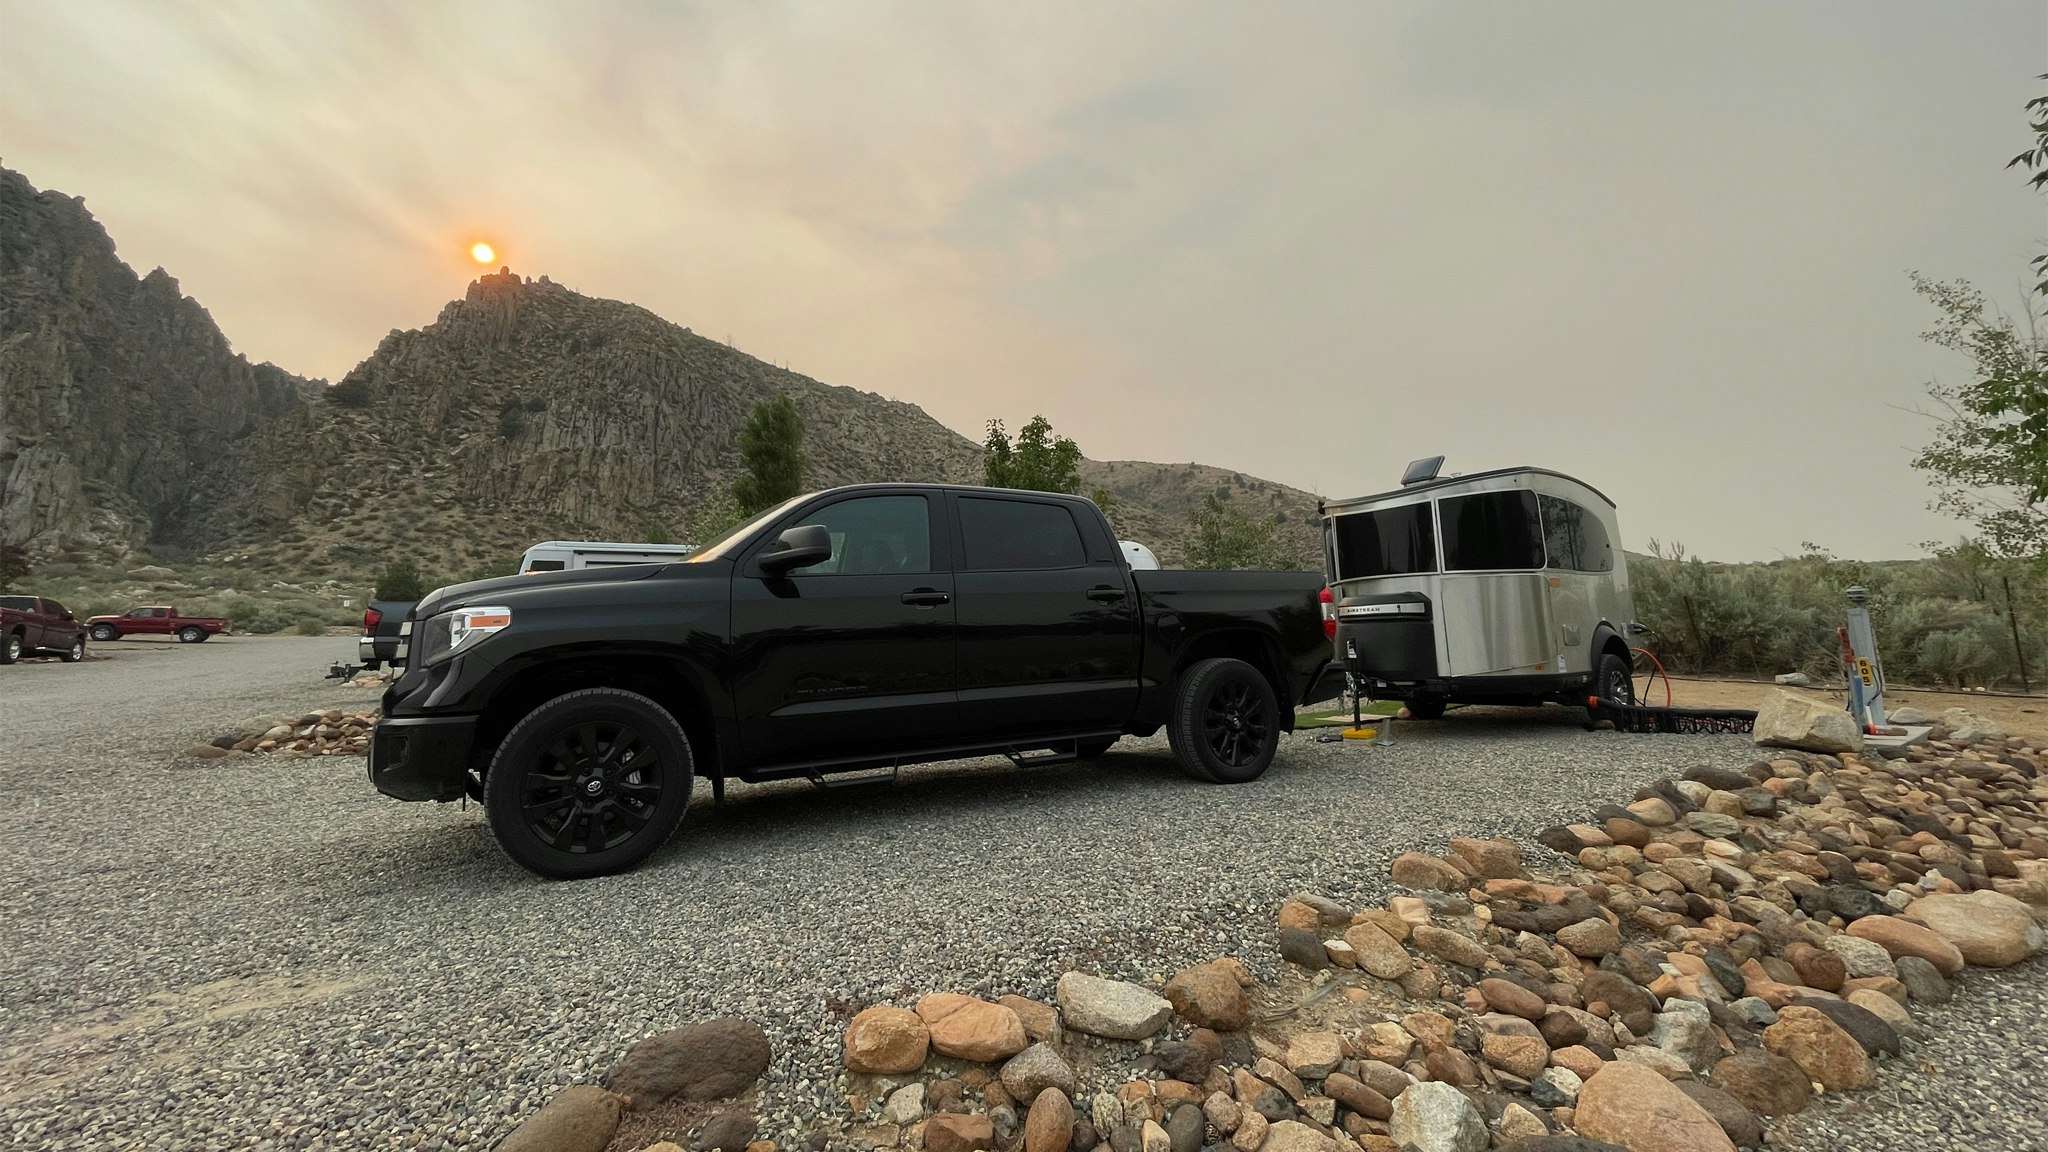 Black truck parking an Airstream Basecamp travel trailer at a campground with mountains and a sunset in the background